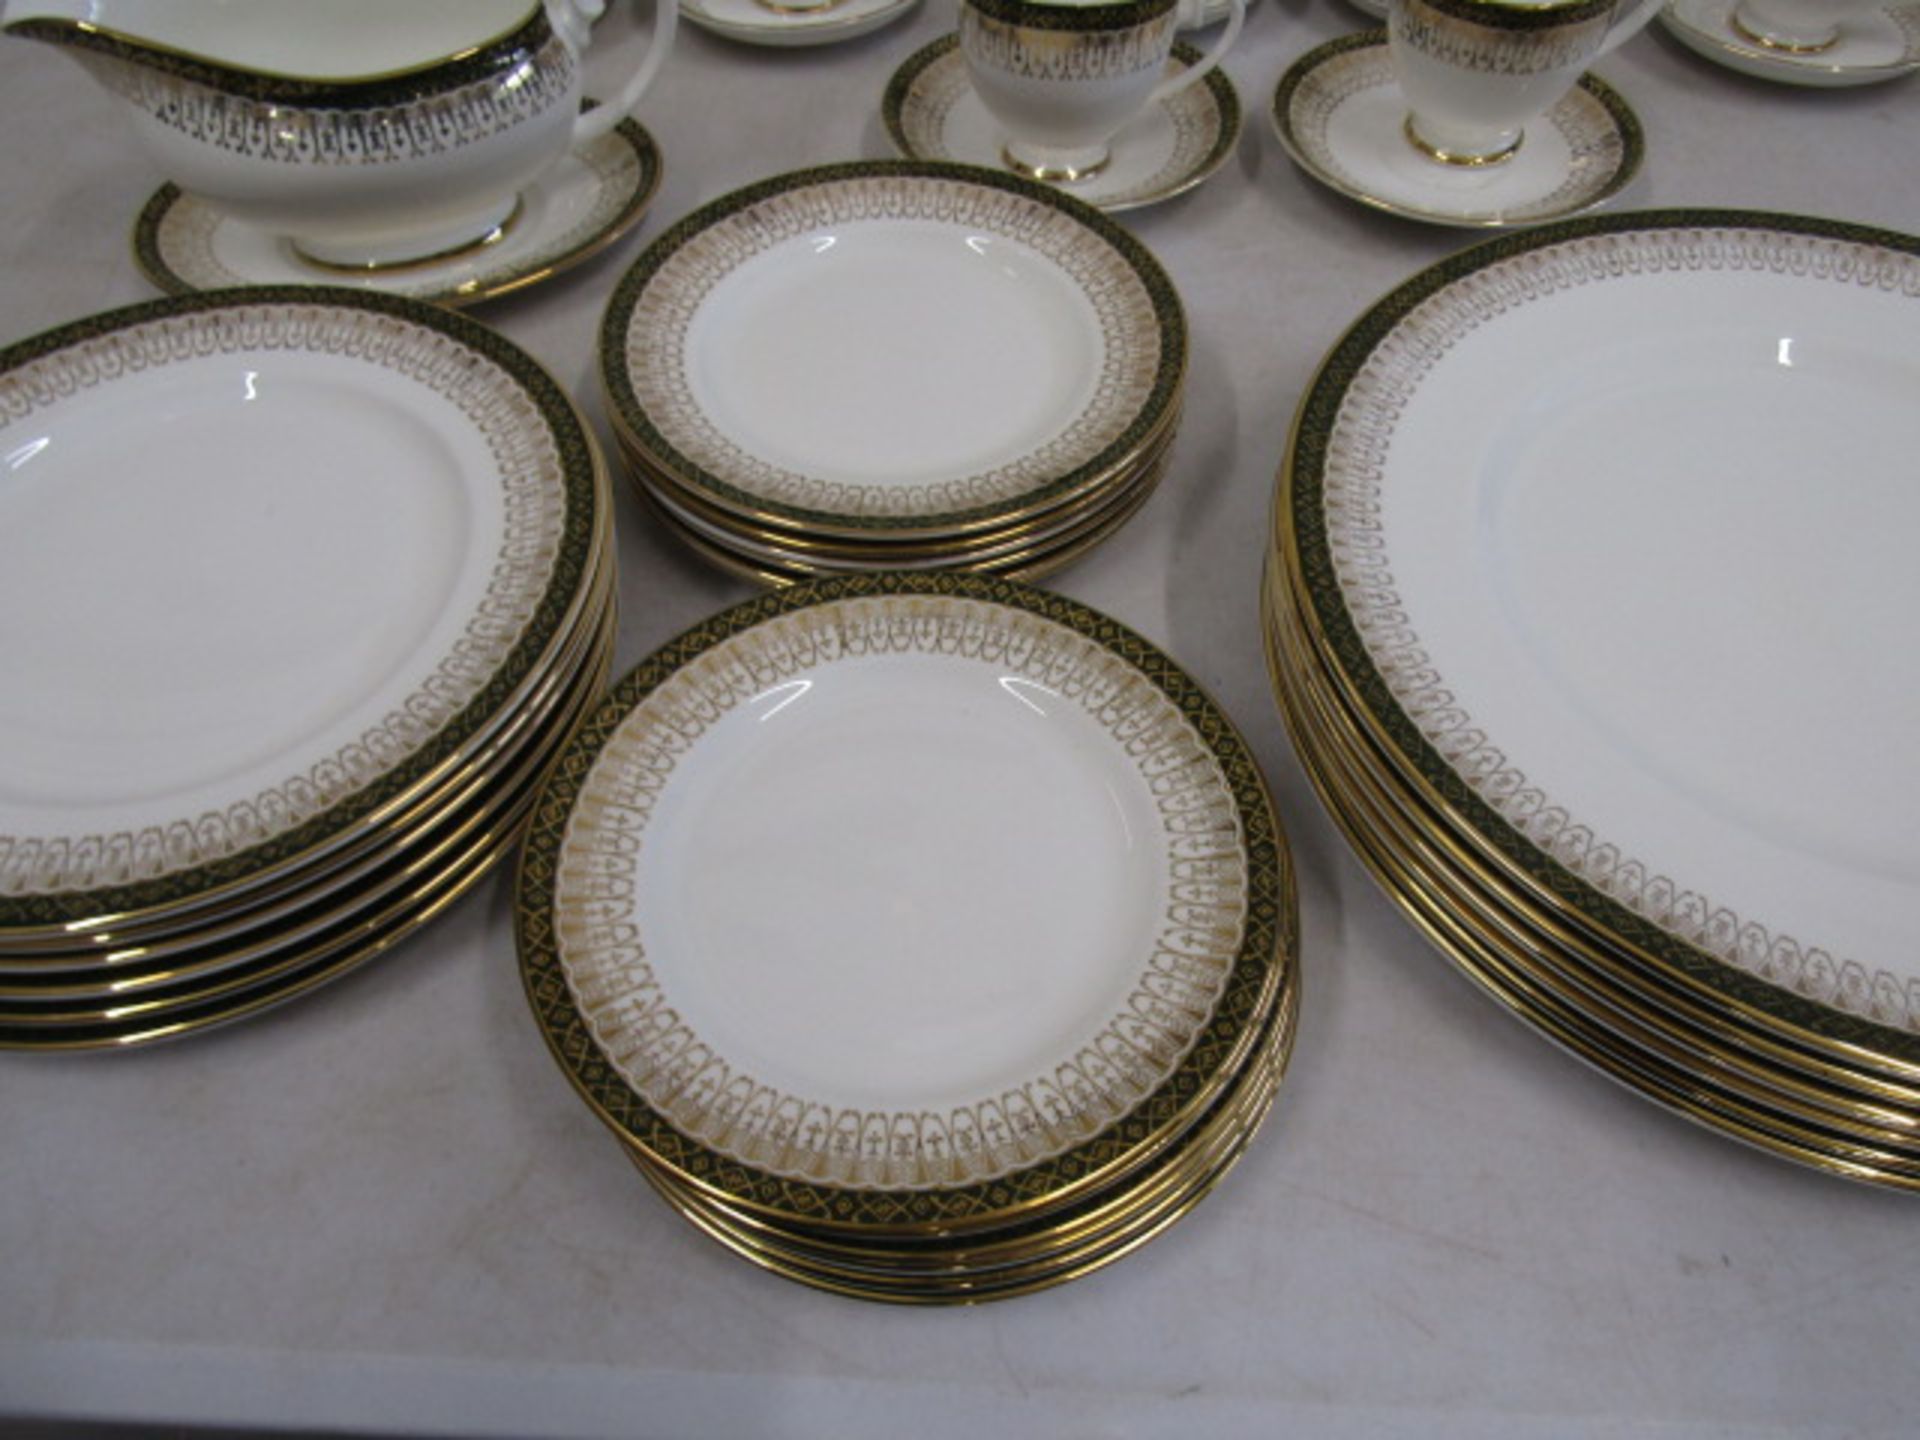 Royal Doulton 'Majestic' dinner service for 6 - Image 6 of 7